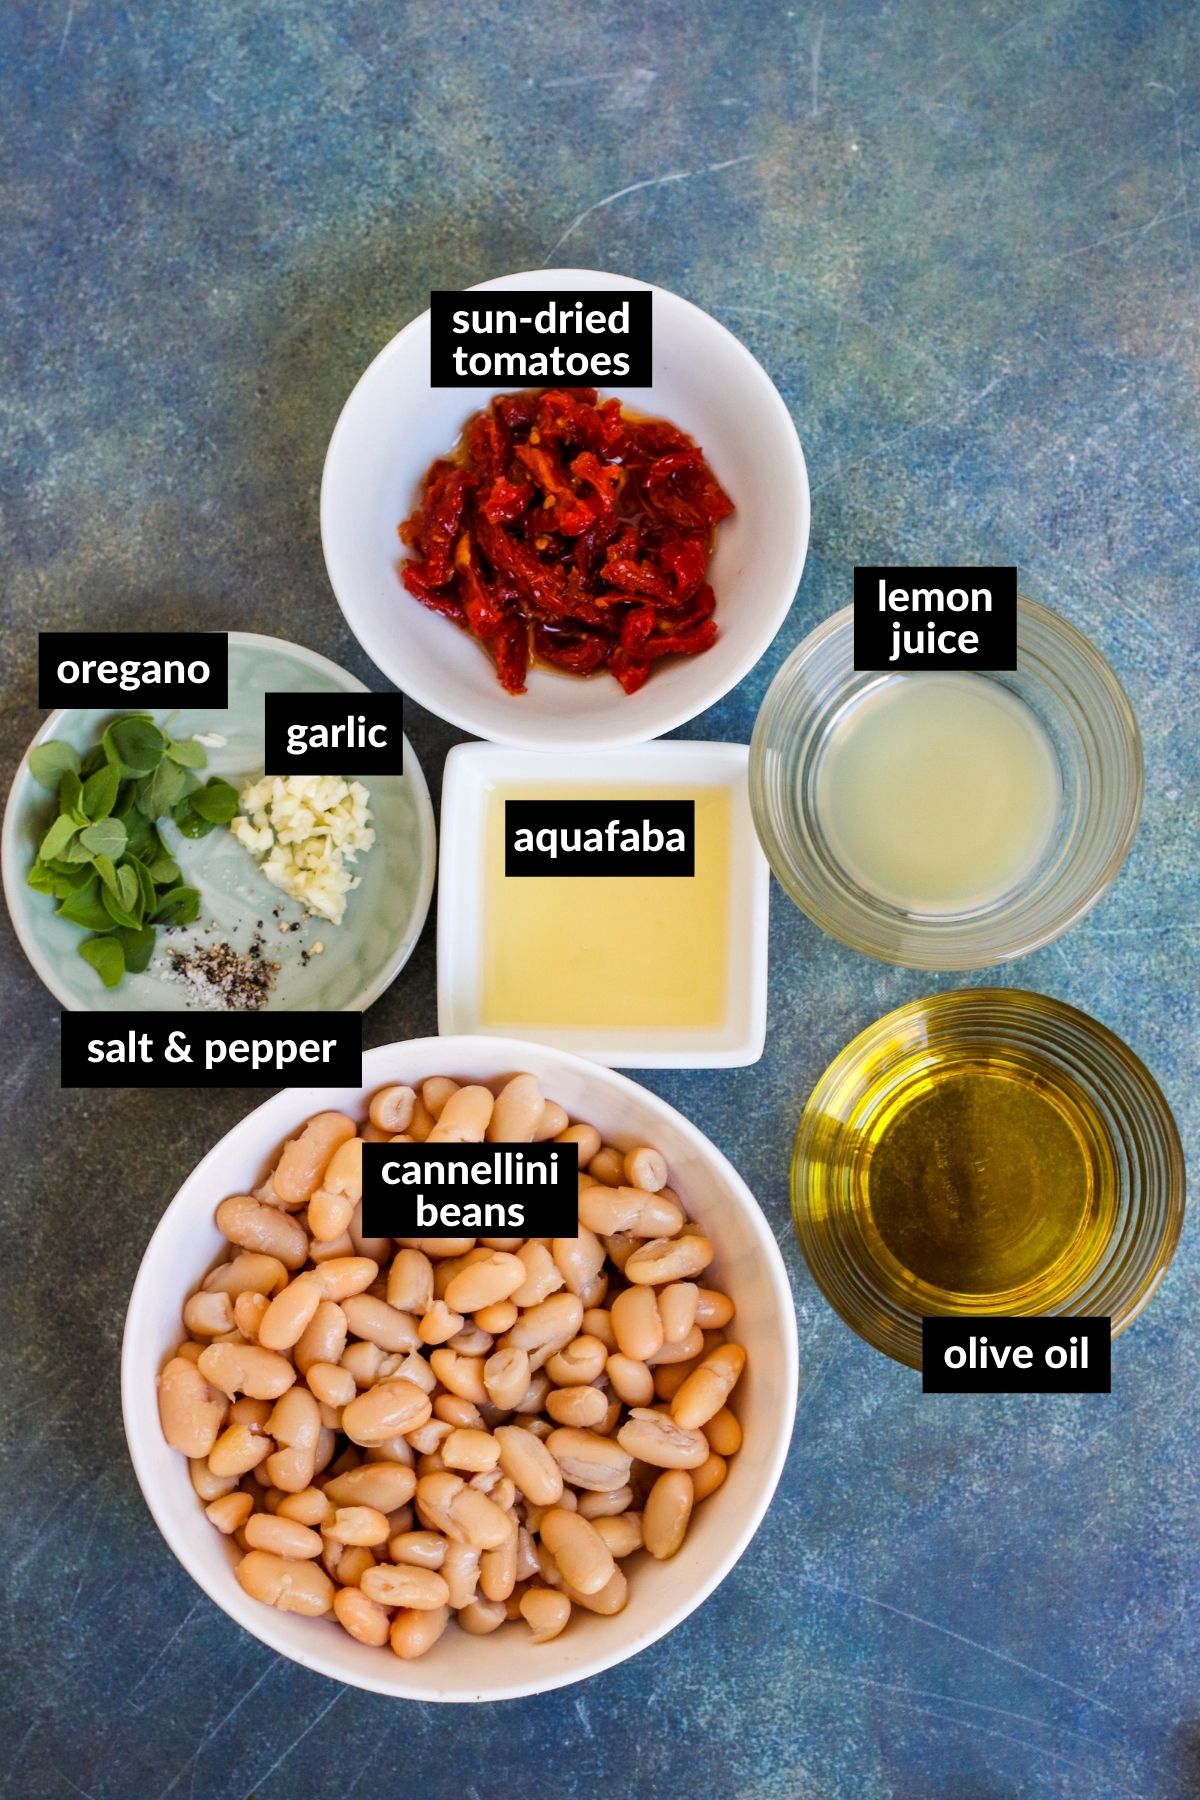 Labeled ingredients shown in bowls that are needed to make this recipe